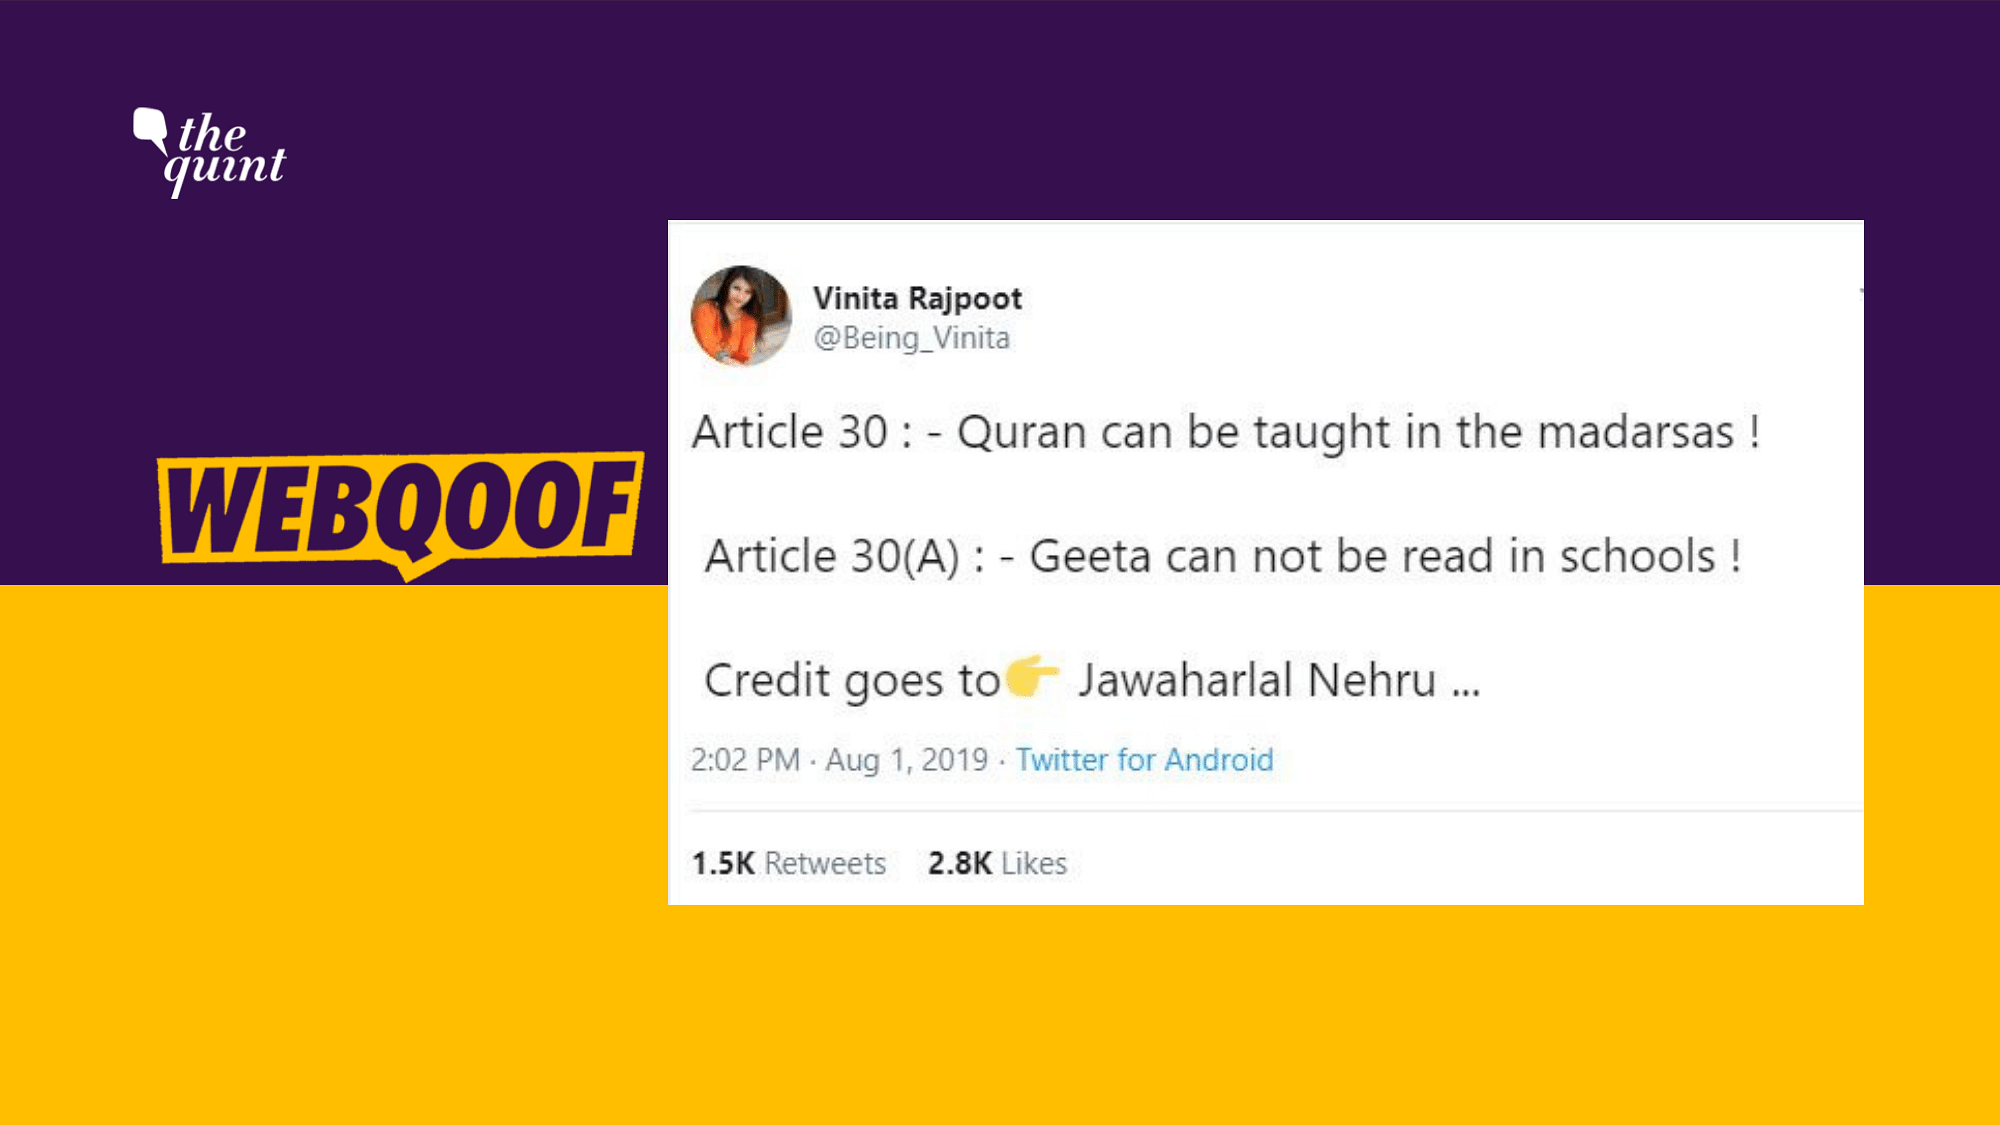 A viral message claims that under Article 30, Quran can be taught in madrasas, while, allegedly under Article 30(A), Bhagavad Gita cannot be read in schools.